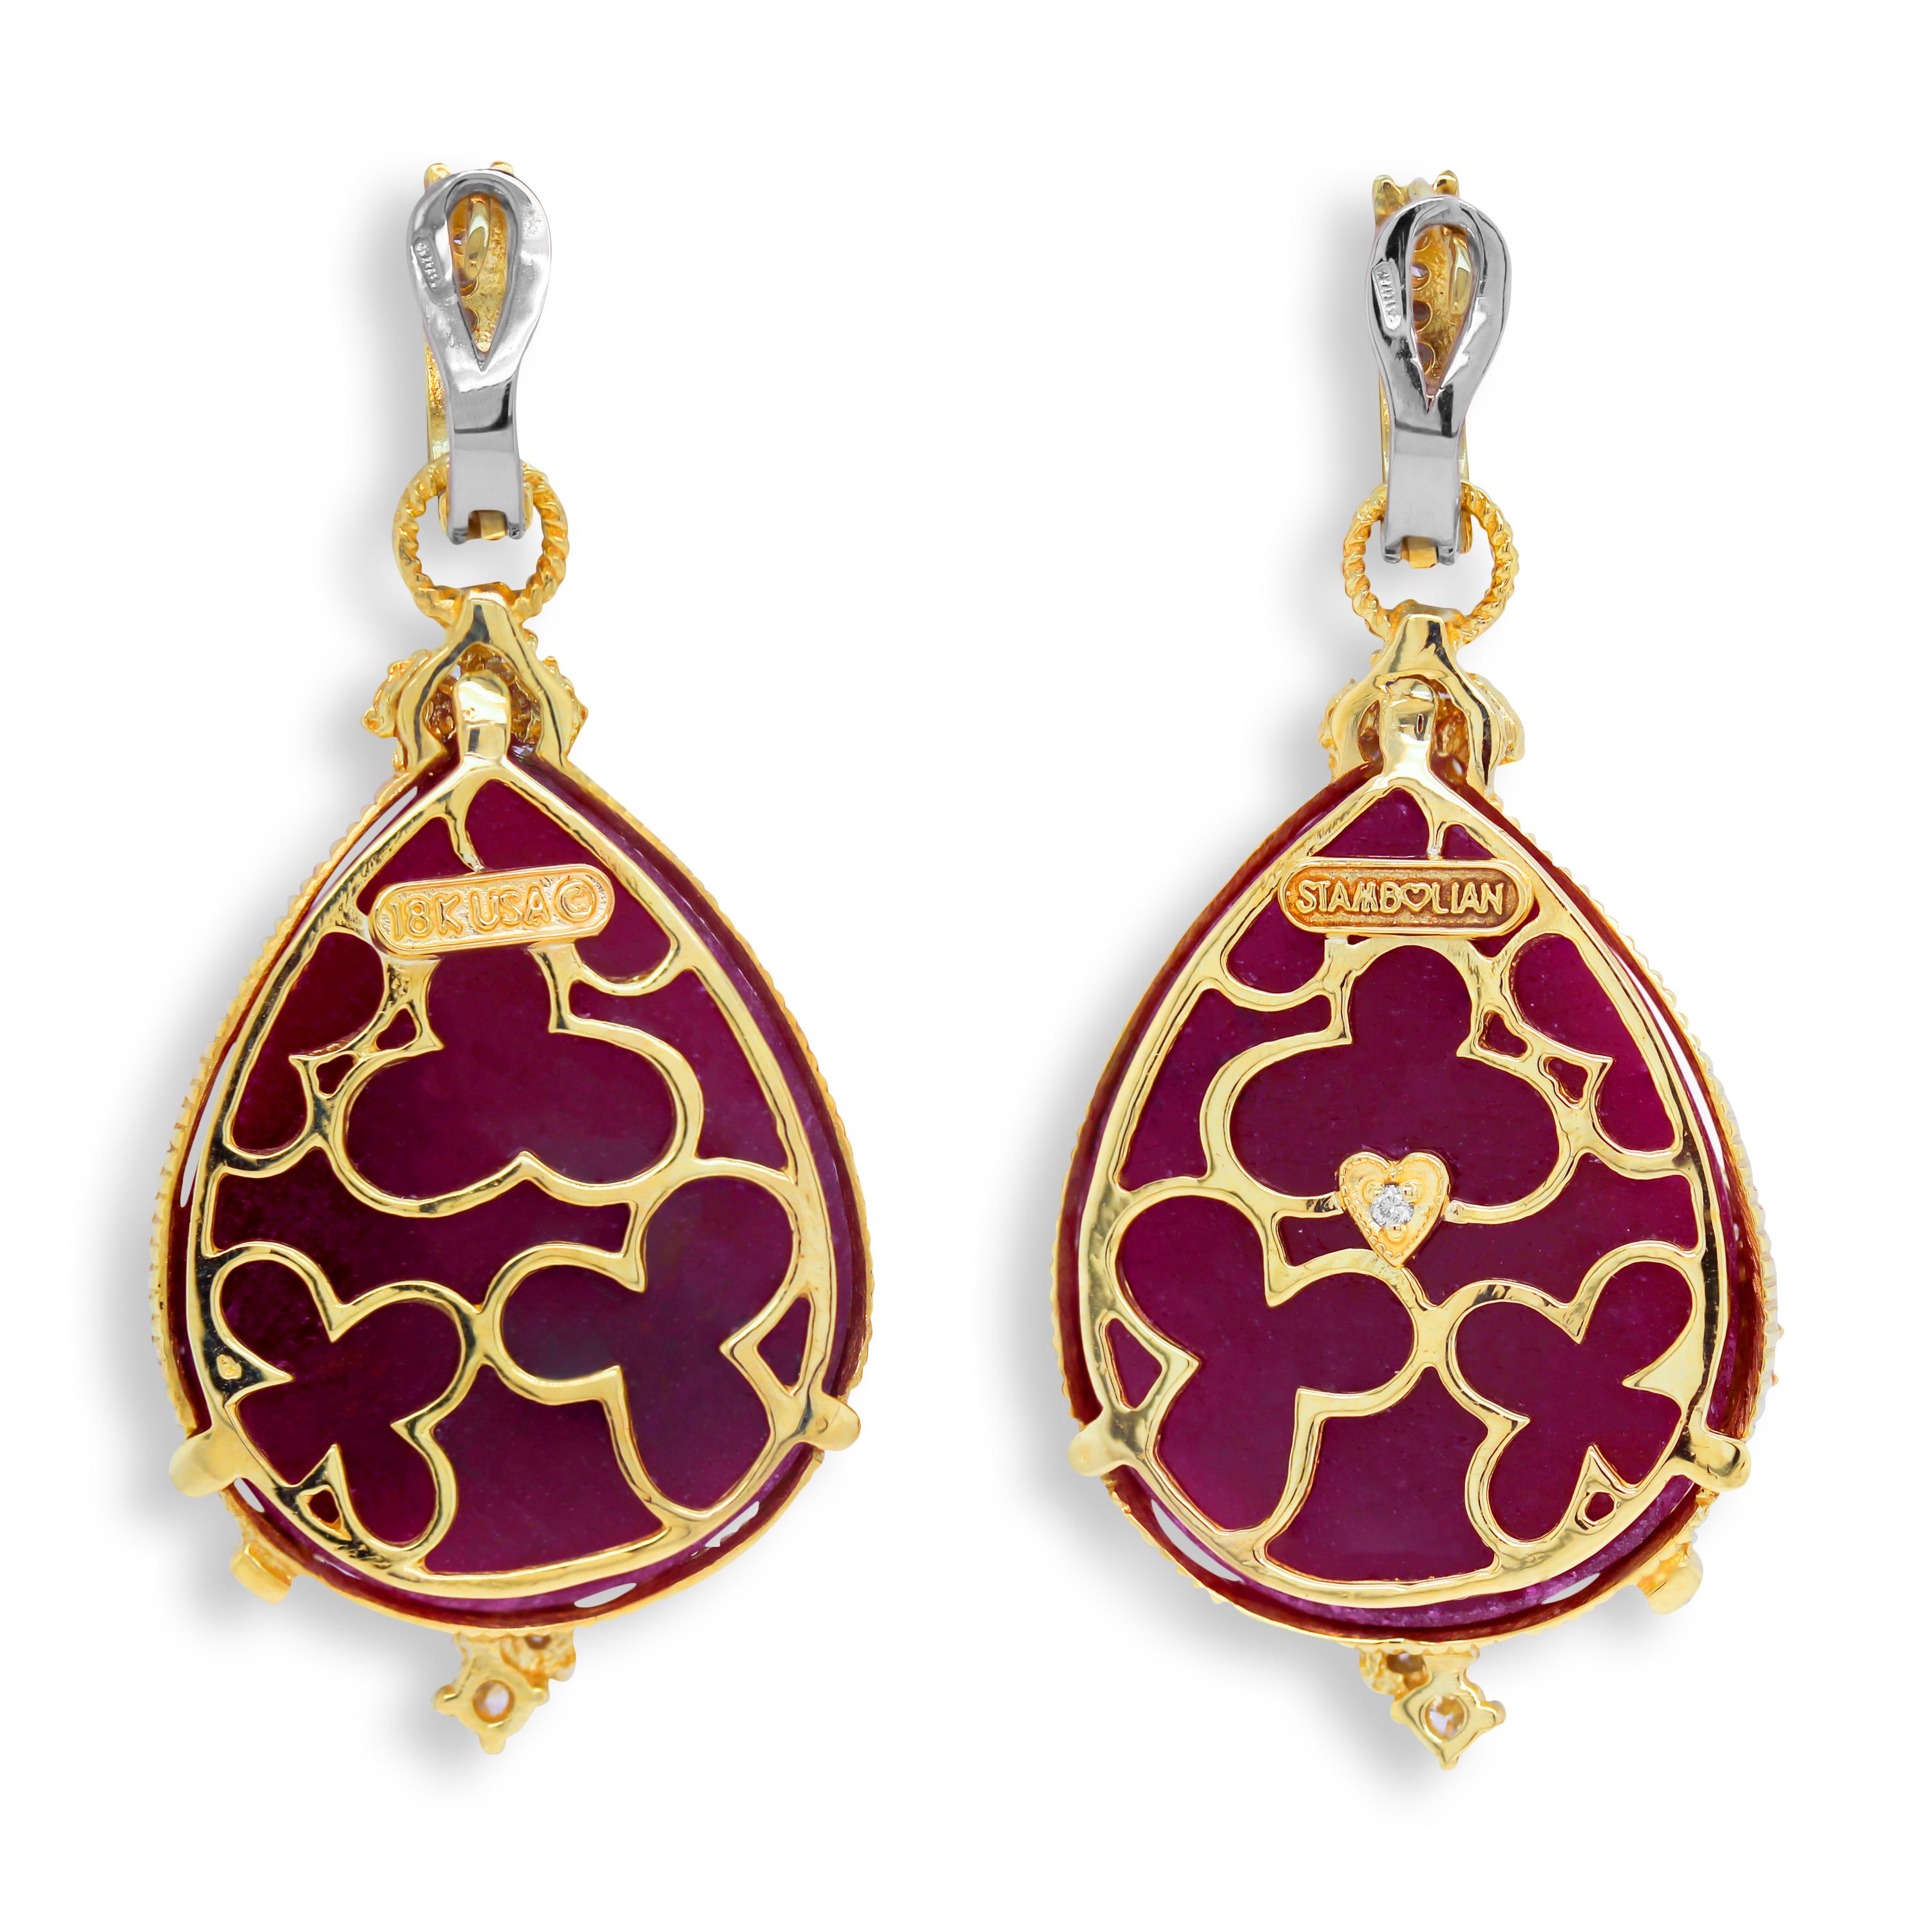 Stambolian 18K Gold and Diamond Drop Dangle Earrings with Sliced Ruby

These rose-cut, sliced rubies have beautiful color in the pigeon blood shade and feature diamonds surrounding all around.

Apprx. 37 carat Ruby total weight

Apprx. 2.12 carat G